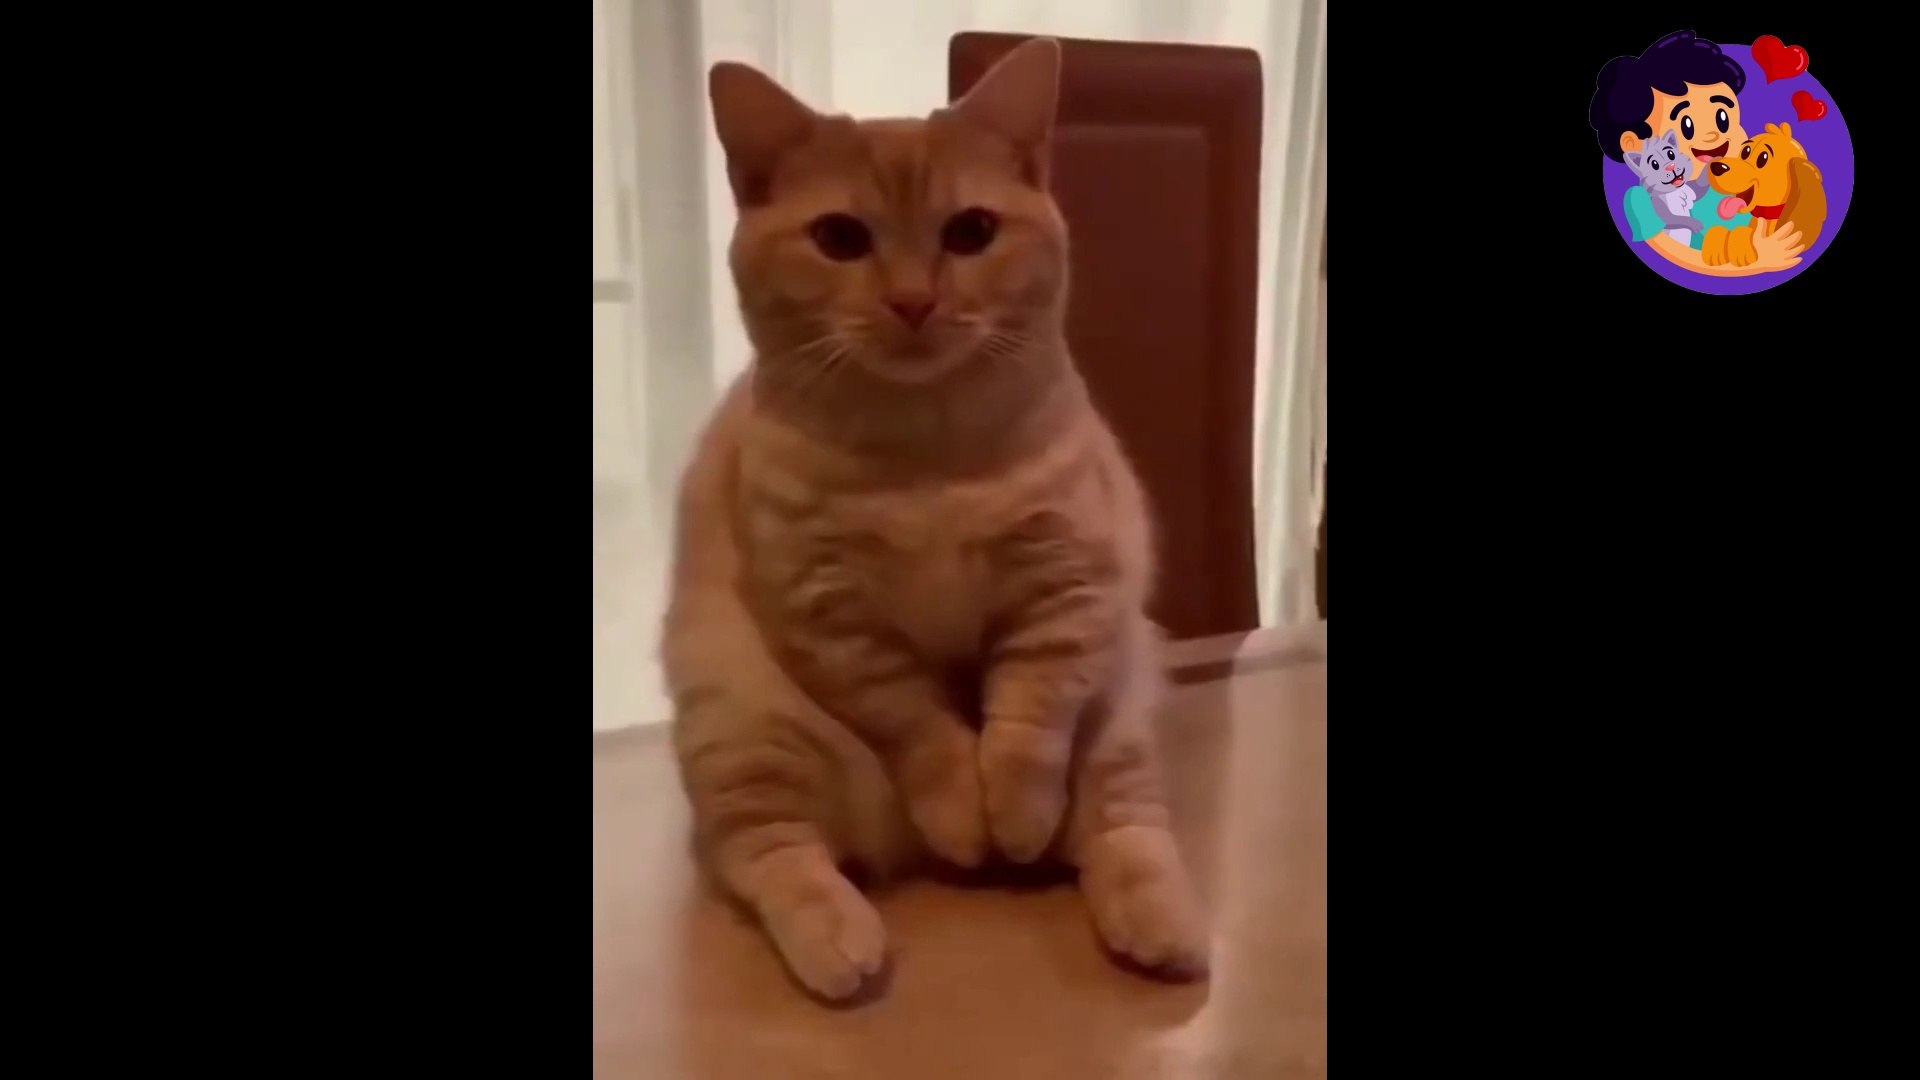 Funniest Scared Cat Video Compilation - video Dailymotion